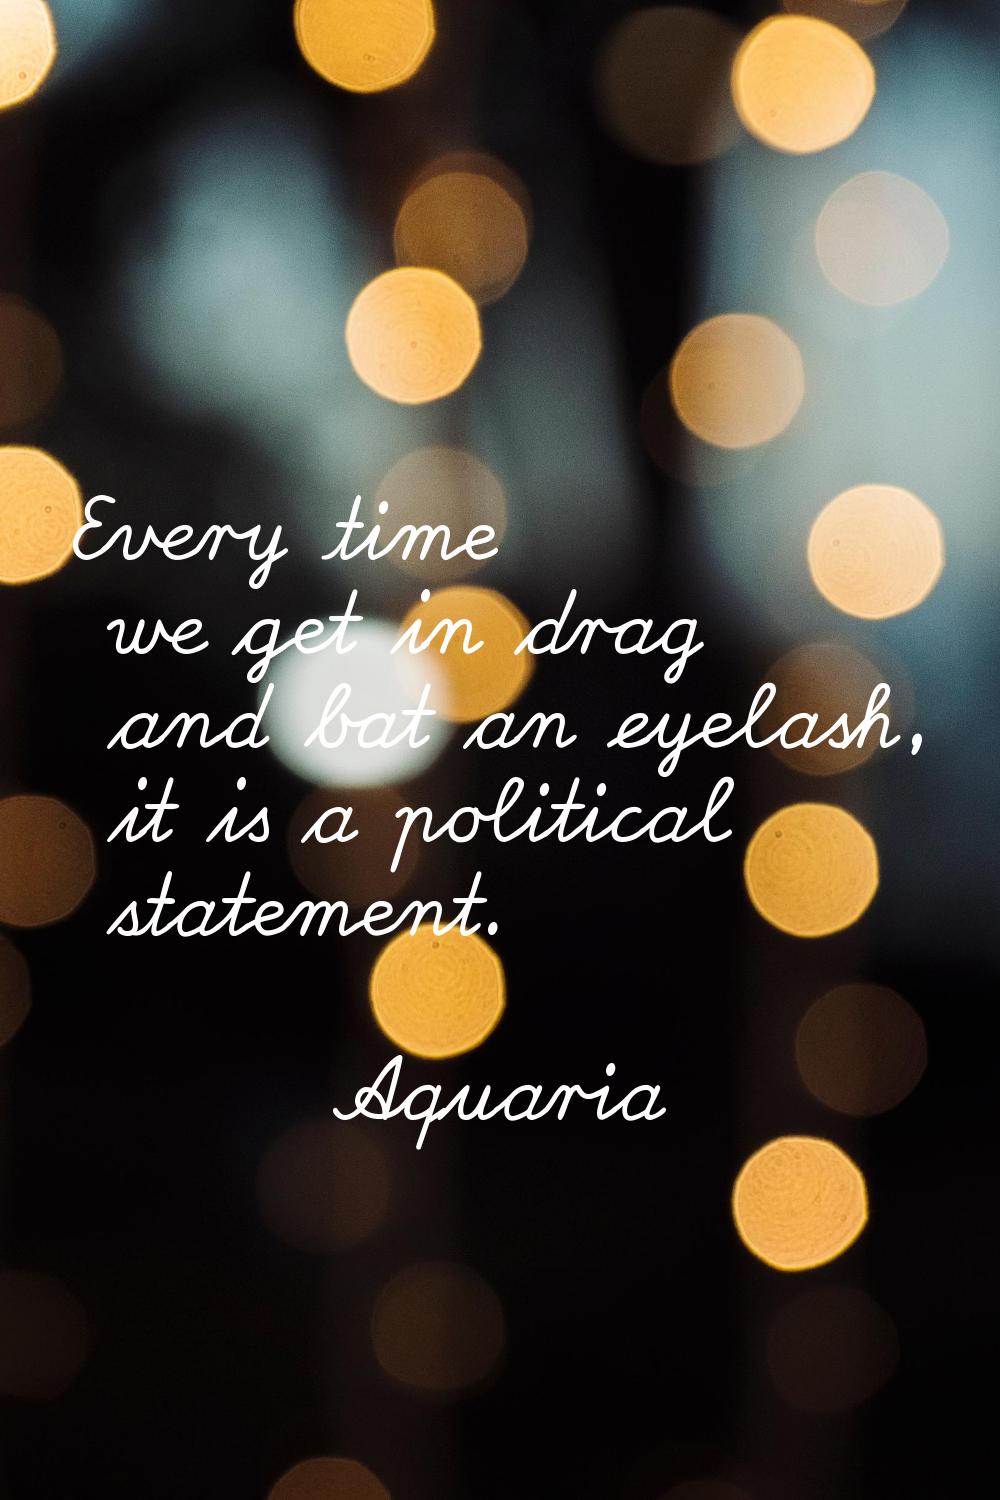 Every time we get in drag and bat an eyelash, it is a political statement.